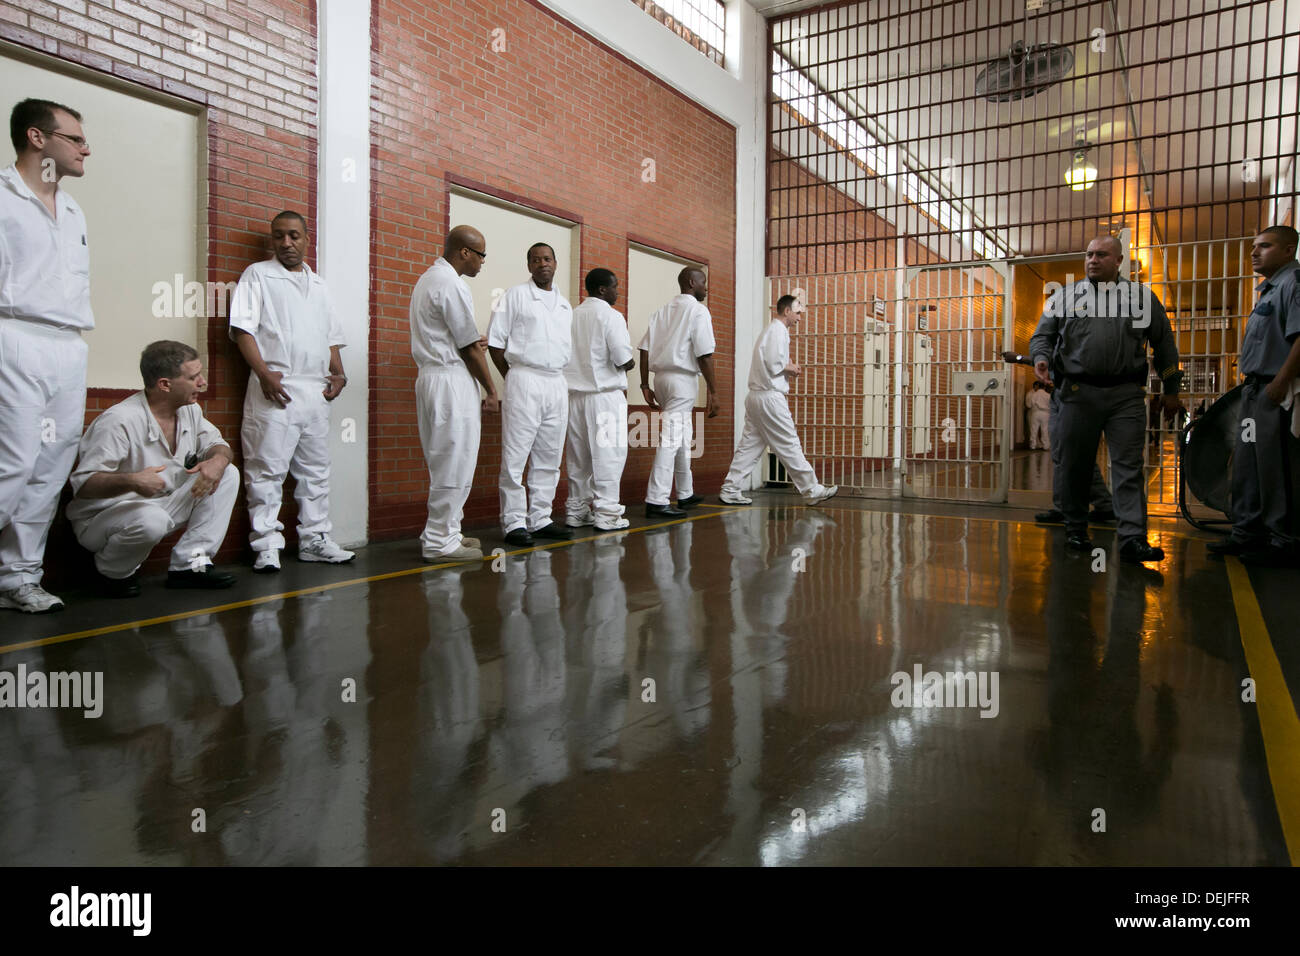 Male inmates at the Darrington Unit near Houston, Texas line up inside prison to attend event. ©MKC/Bob Daemmrich Photography, Inc. Stock Photo